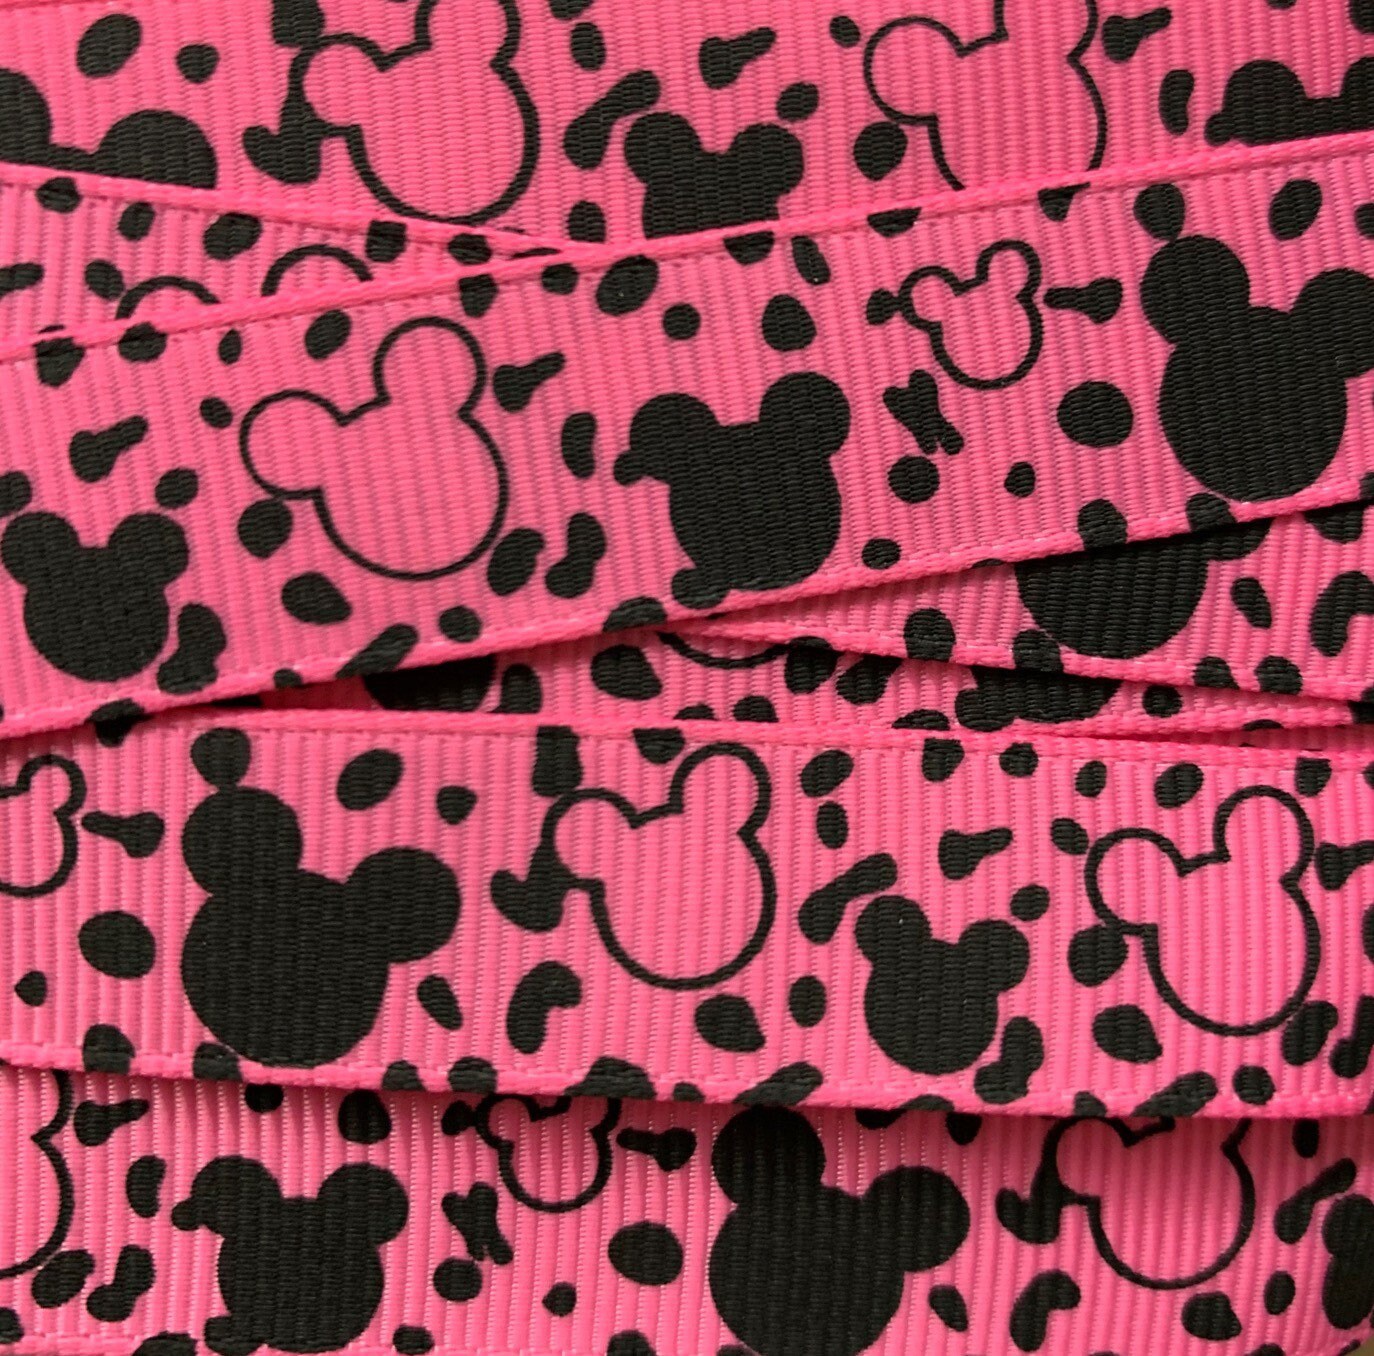 Mickey Mouse heads with animal print 5 yards on hot pink 5/8" grosgrain ribbon * TWRH limited stock.